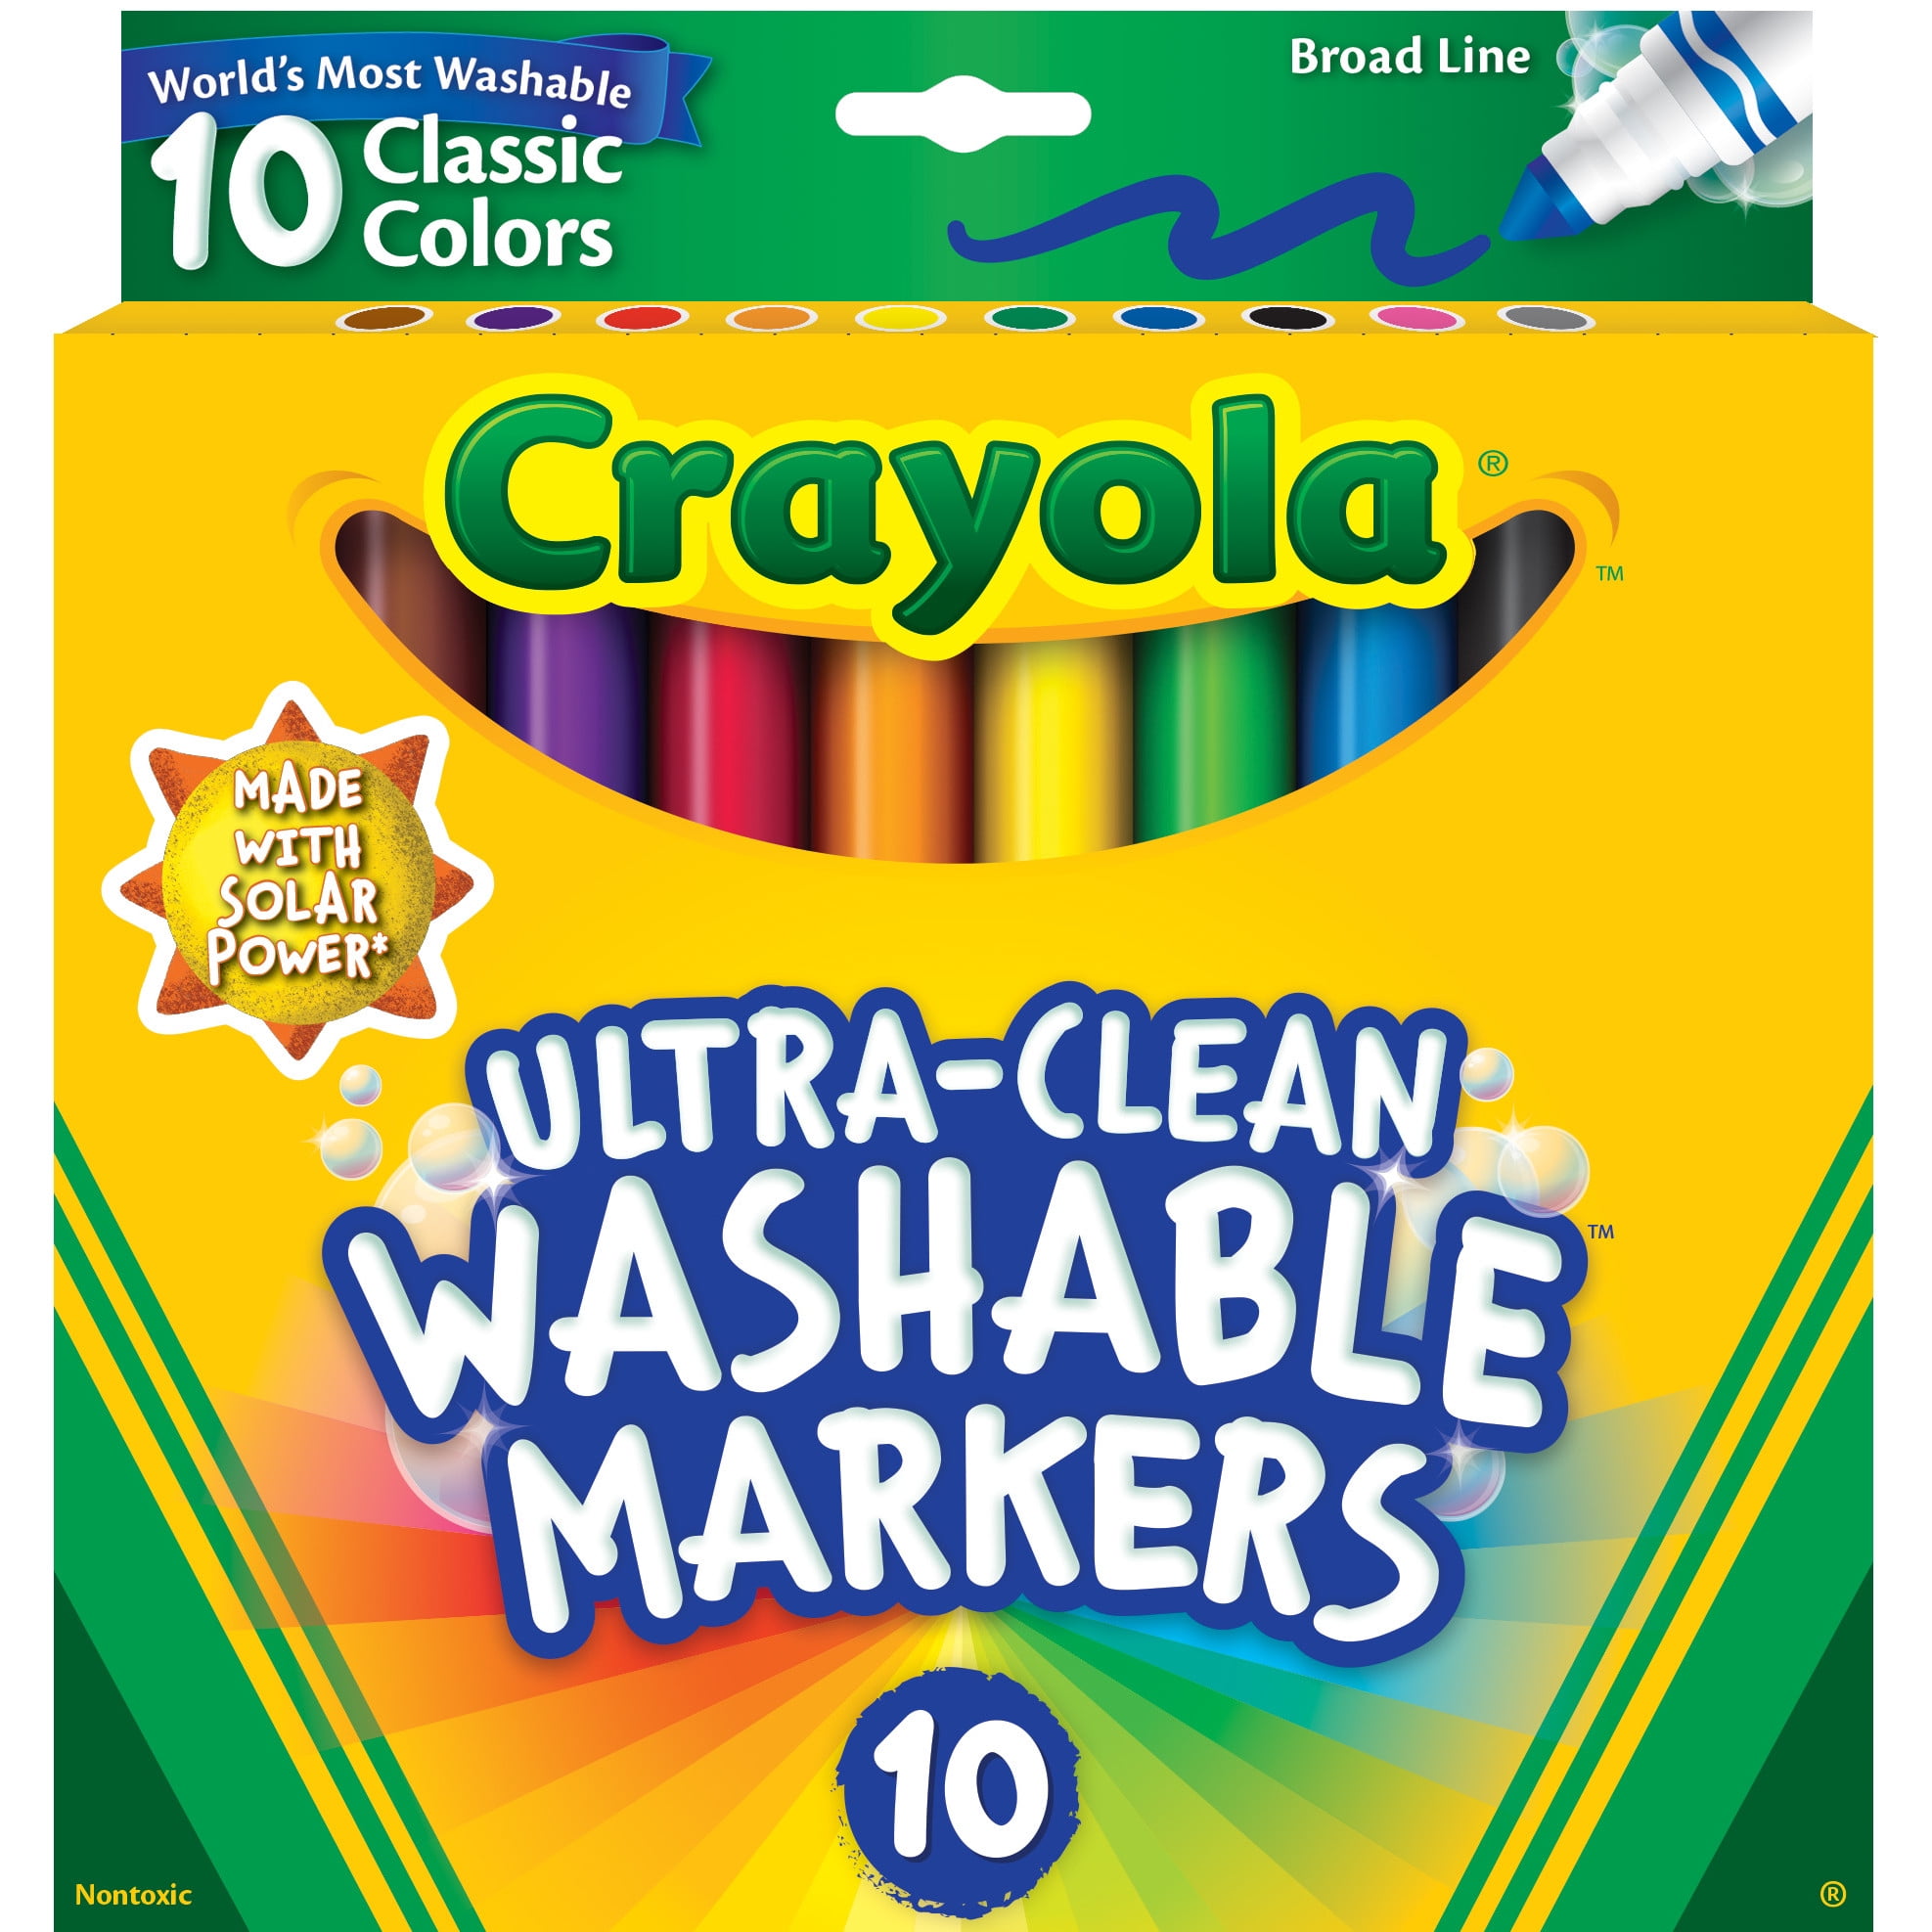 Crayola Ultra-Clean Washable Broad Line Markers, School Supplies, 10 Count